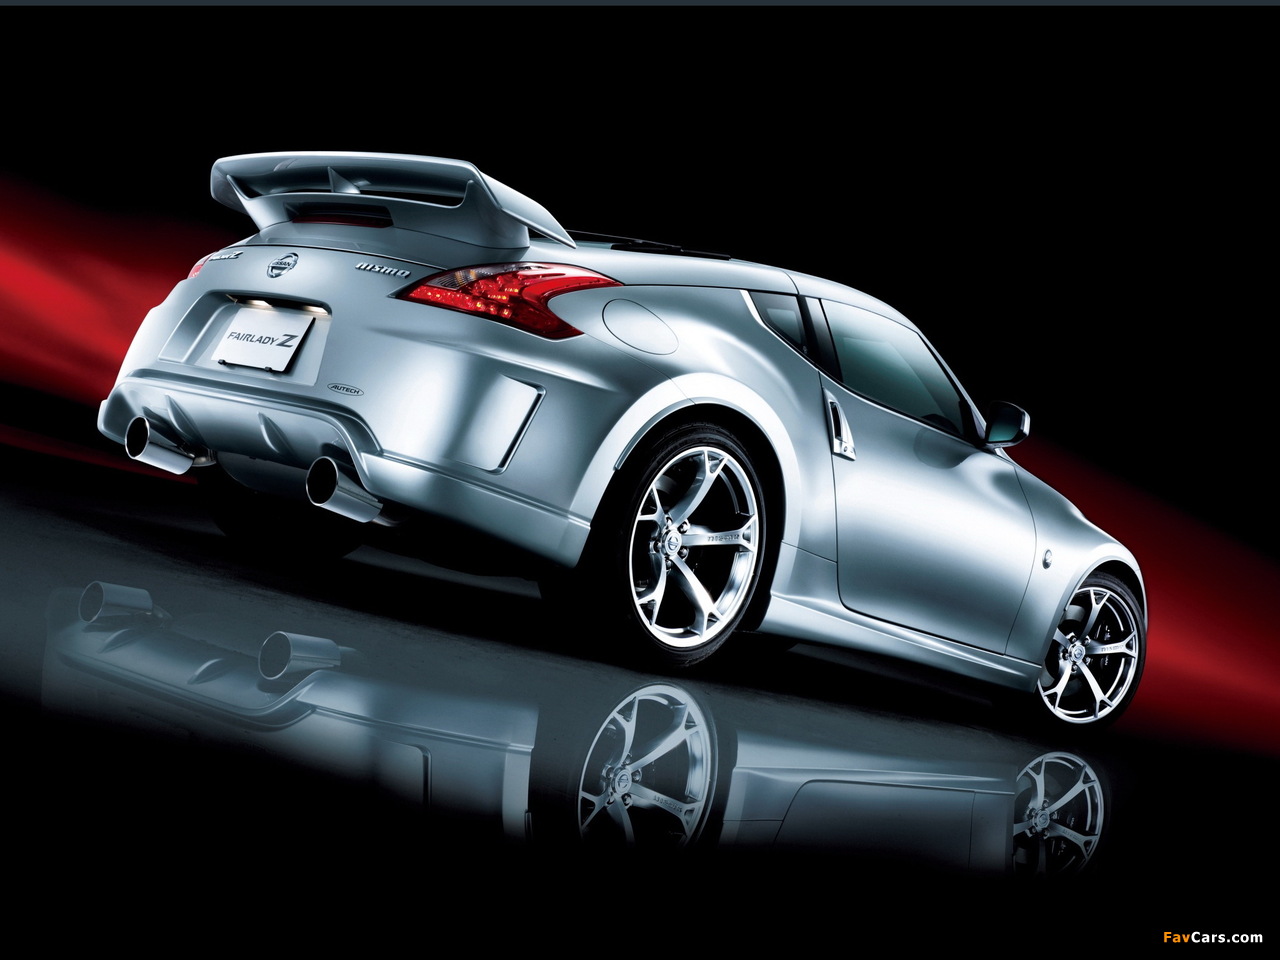 Nismo Nissan Fairlady Z 2008 pictures (1280 x 960)